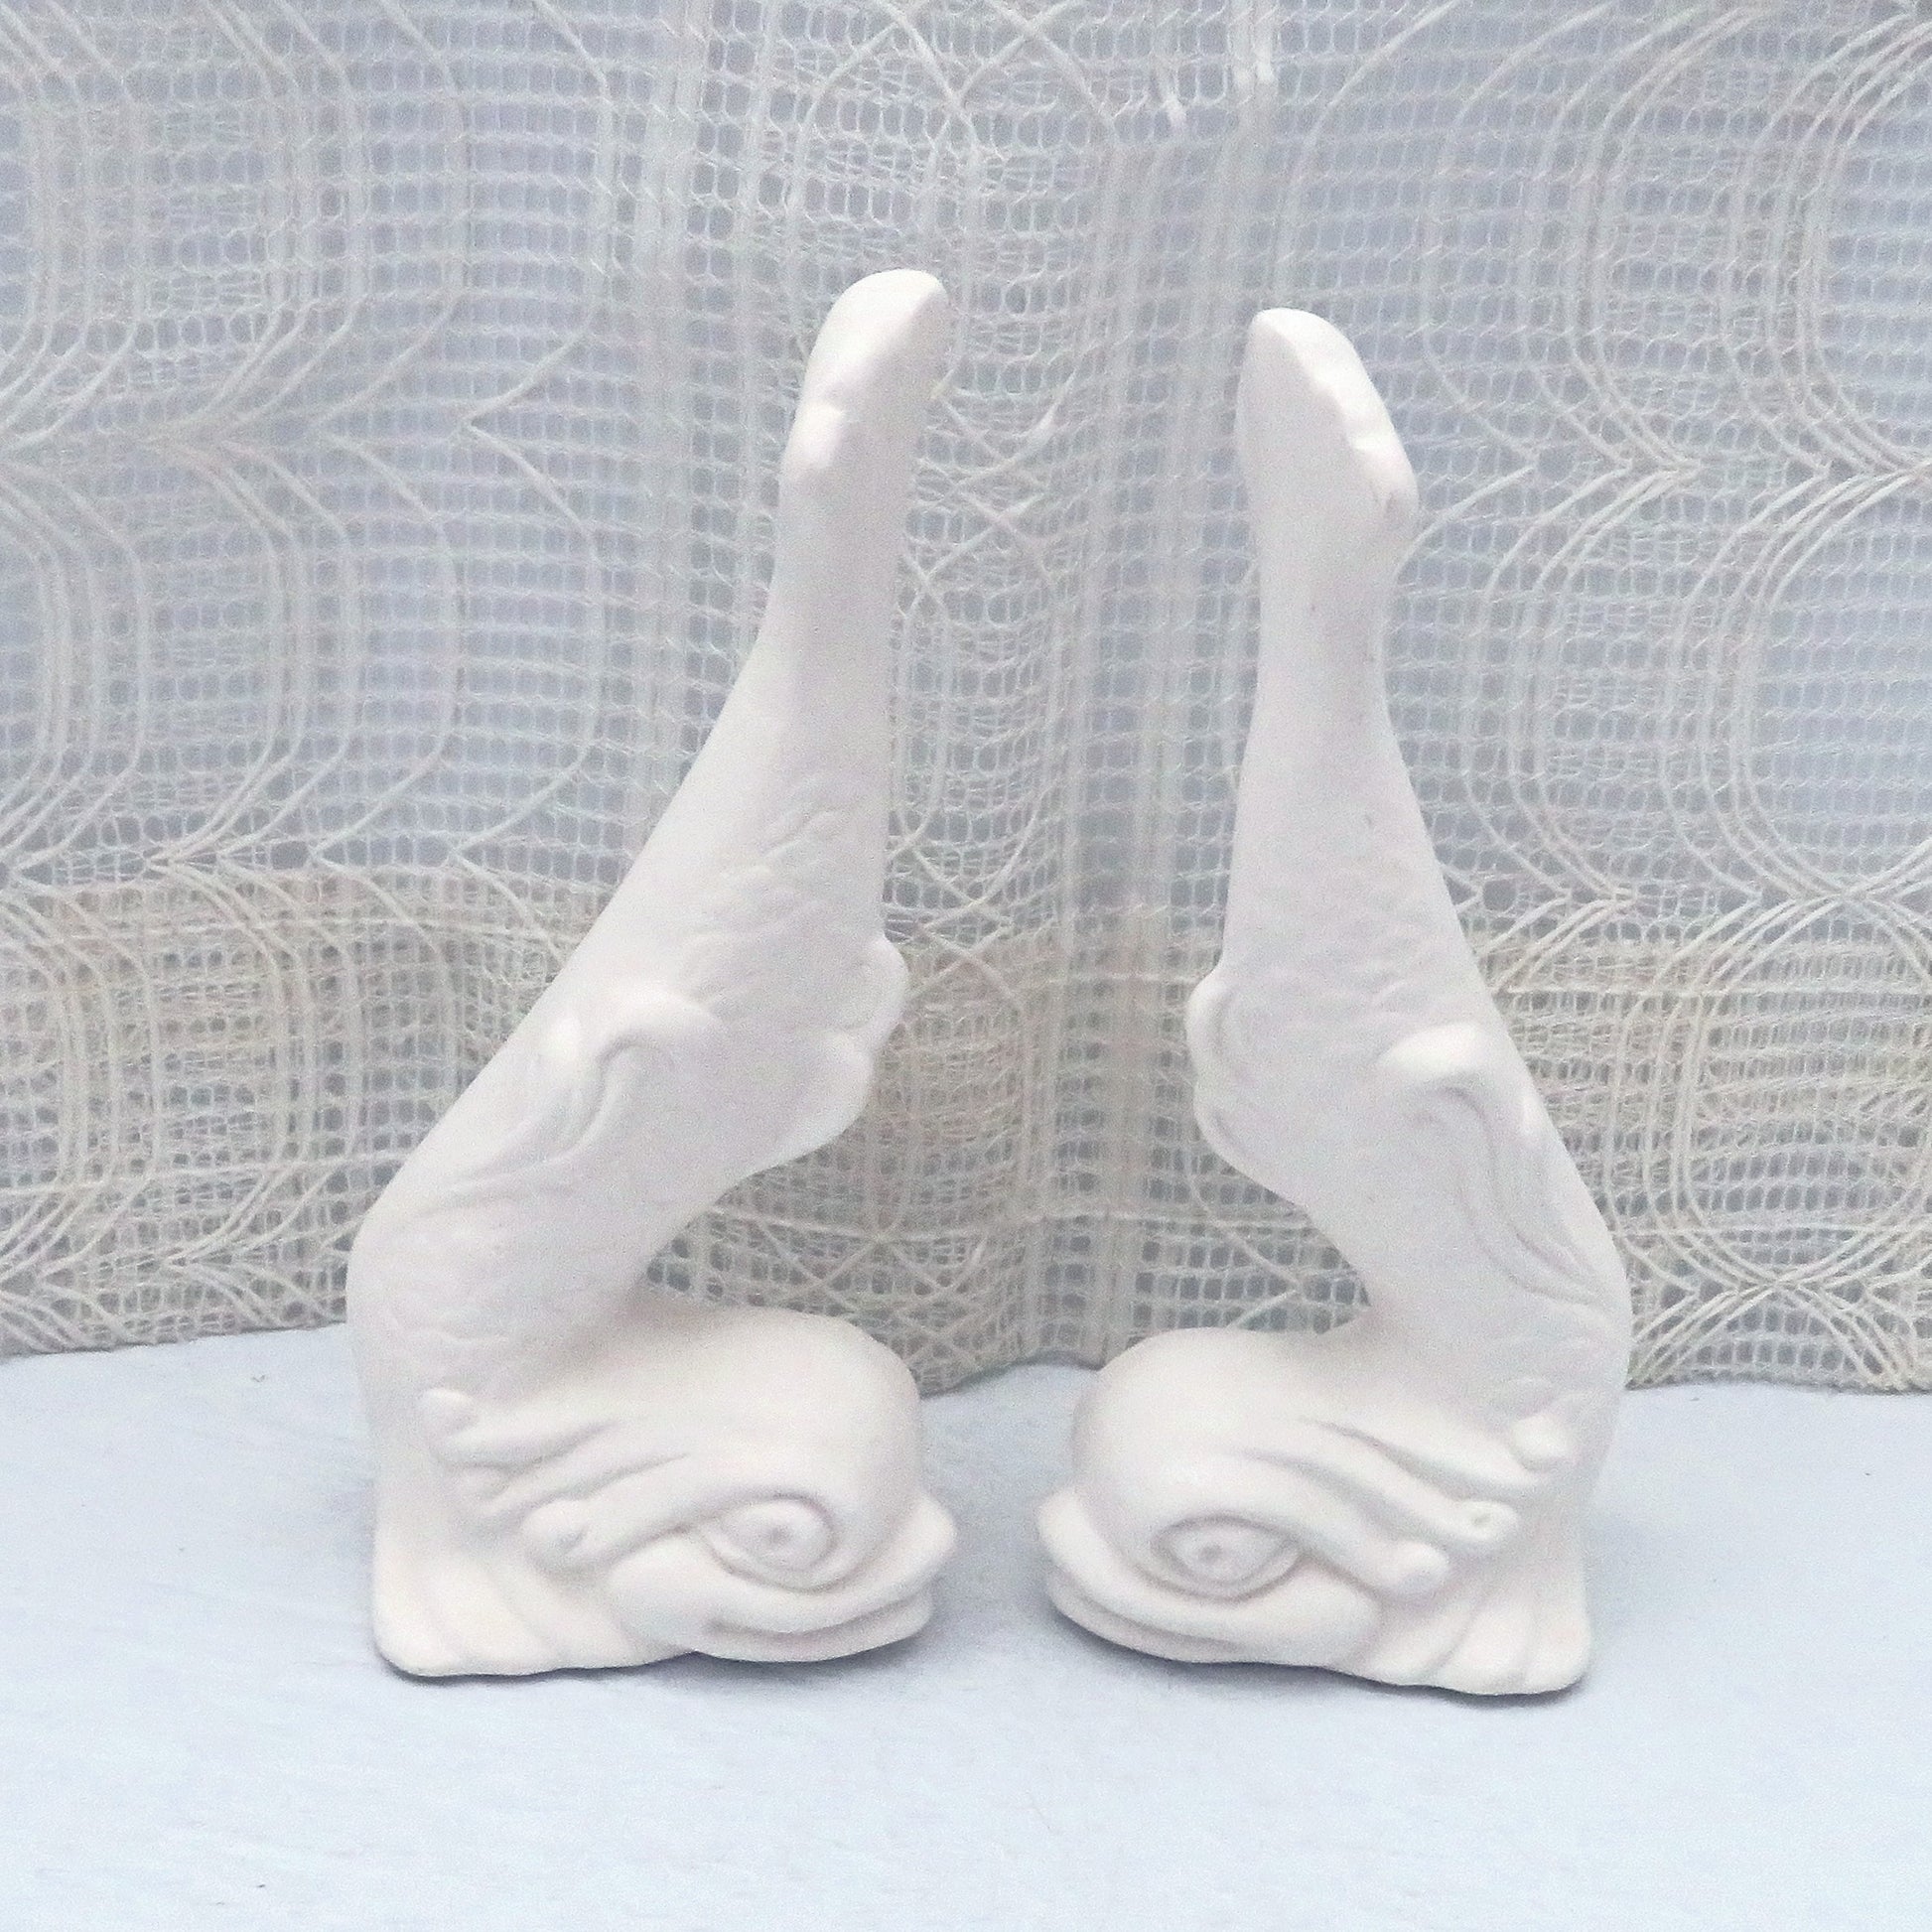 Set of 2 unpainted ceramic fish statues facing each other, giving us a side view.